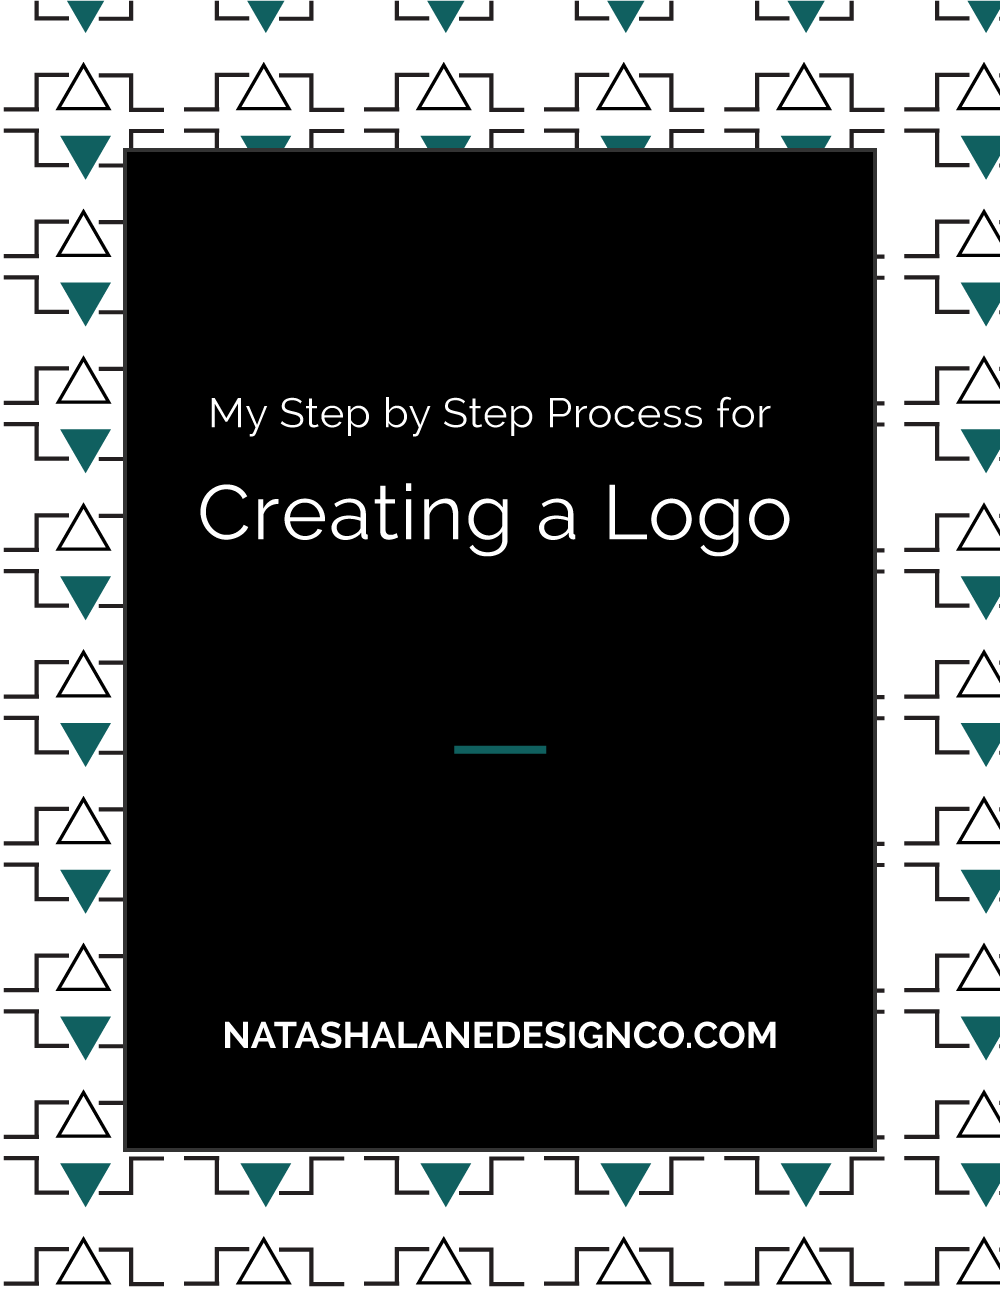 Blog title- My Step by Step Process to Creating a Logo